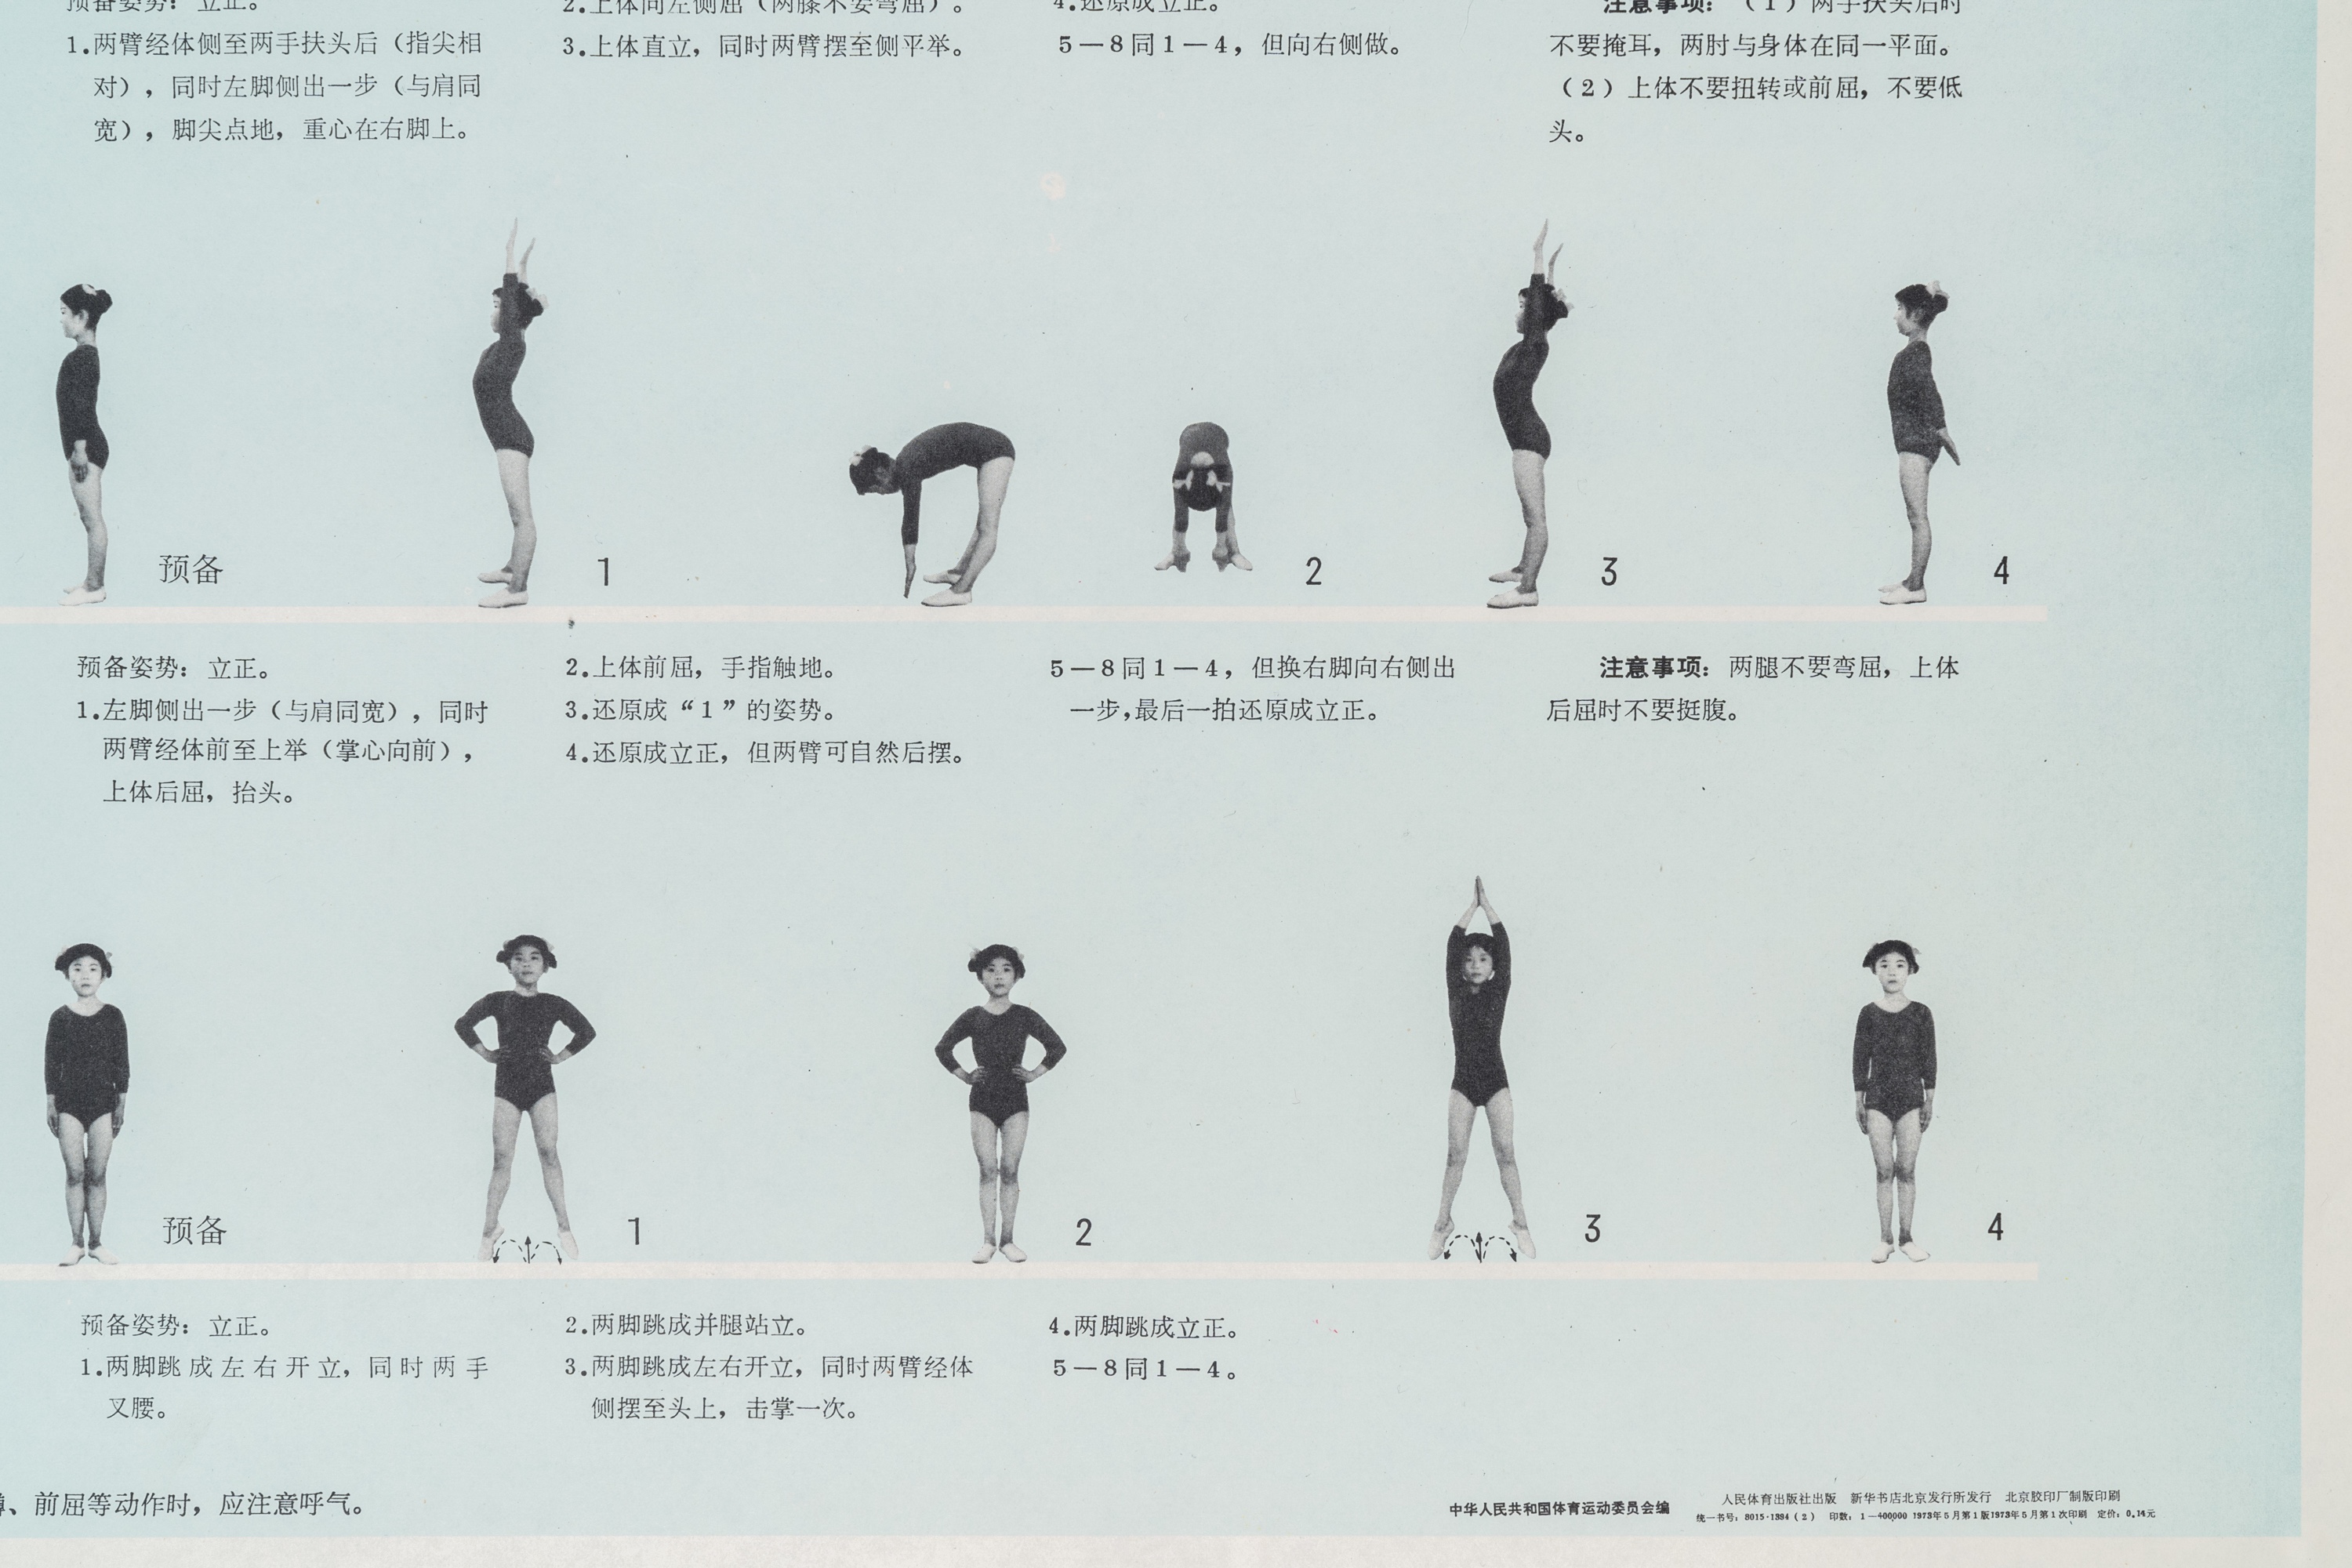 Five Chinese Cultural Revolution propaganda posters with swimming and gymnastics instructions - Image 25 of 26